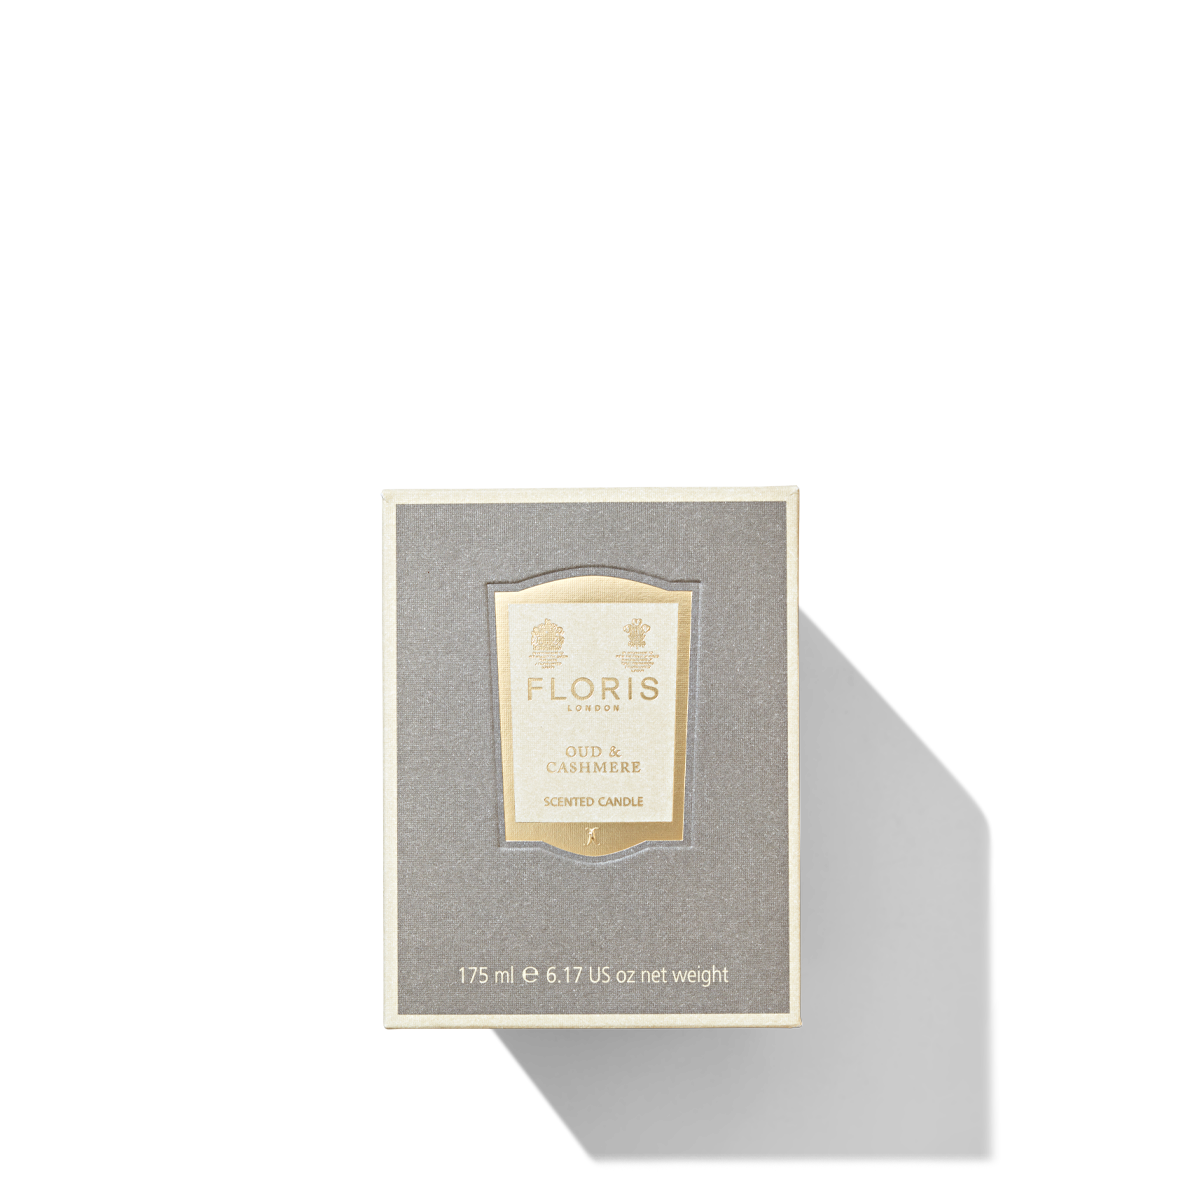 Floris London Oud & Cashmere Scented Candle box in white and grey 